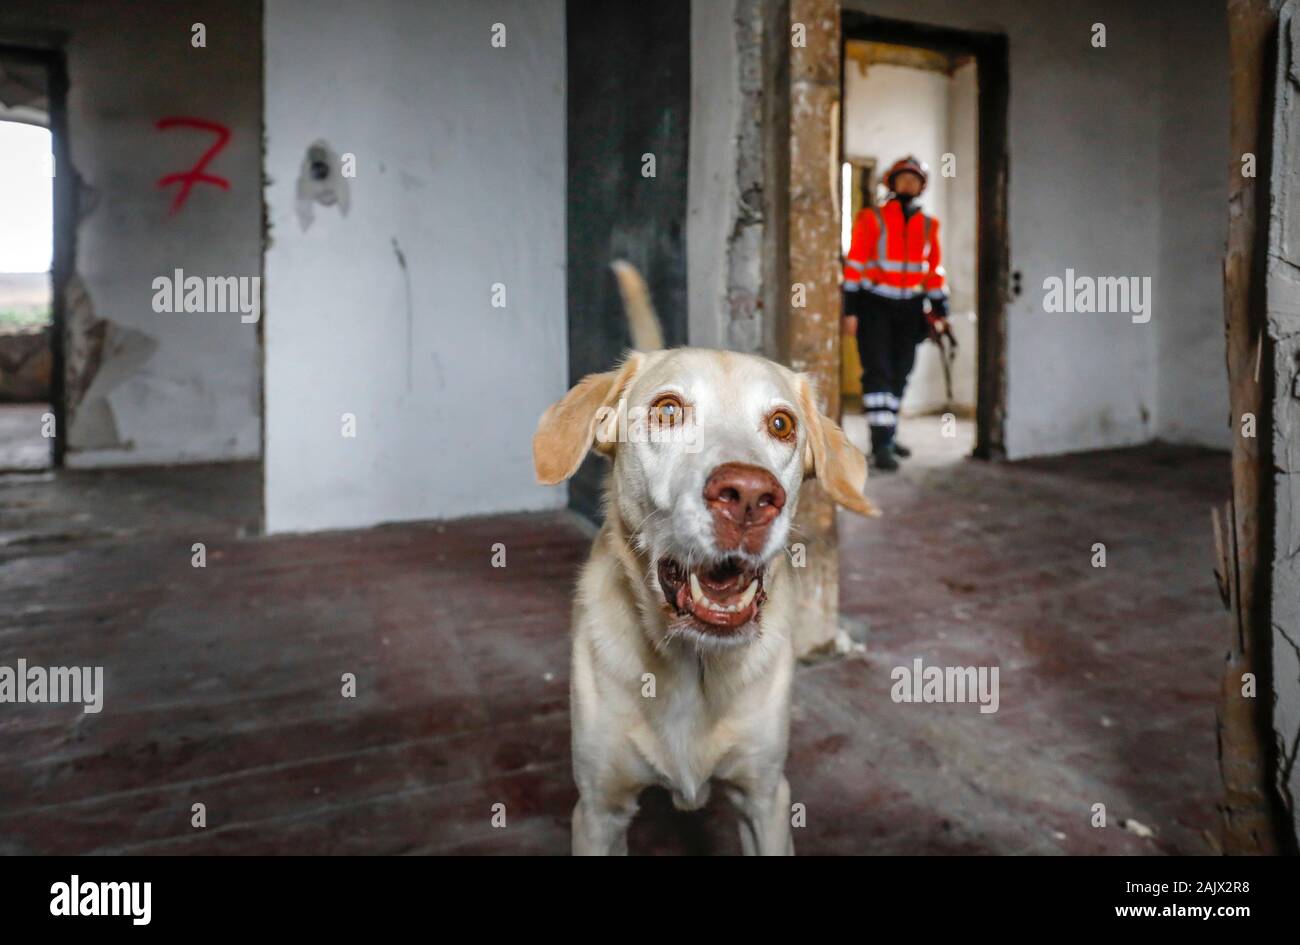 Herne, North Rhine-Westphalia, Germany - Rescue dog training, in empty houses the tracker dogs practice the search for injured, buried people e.g. aft Stock Photo